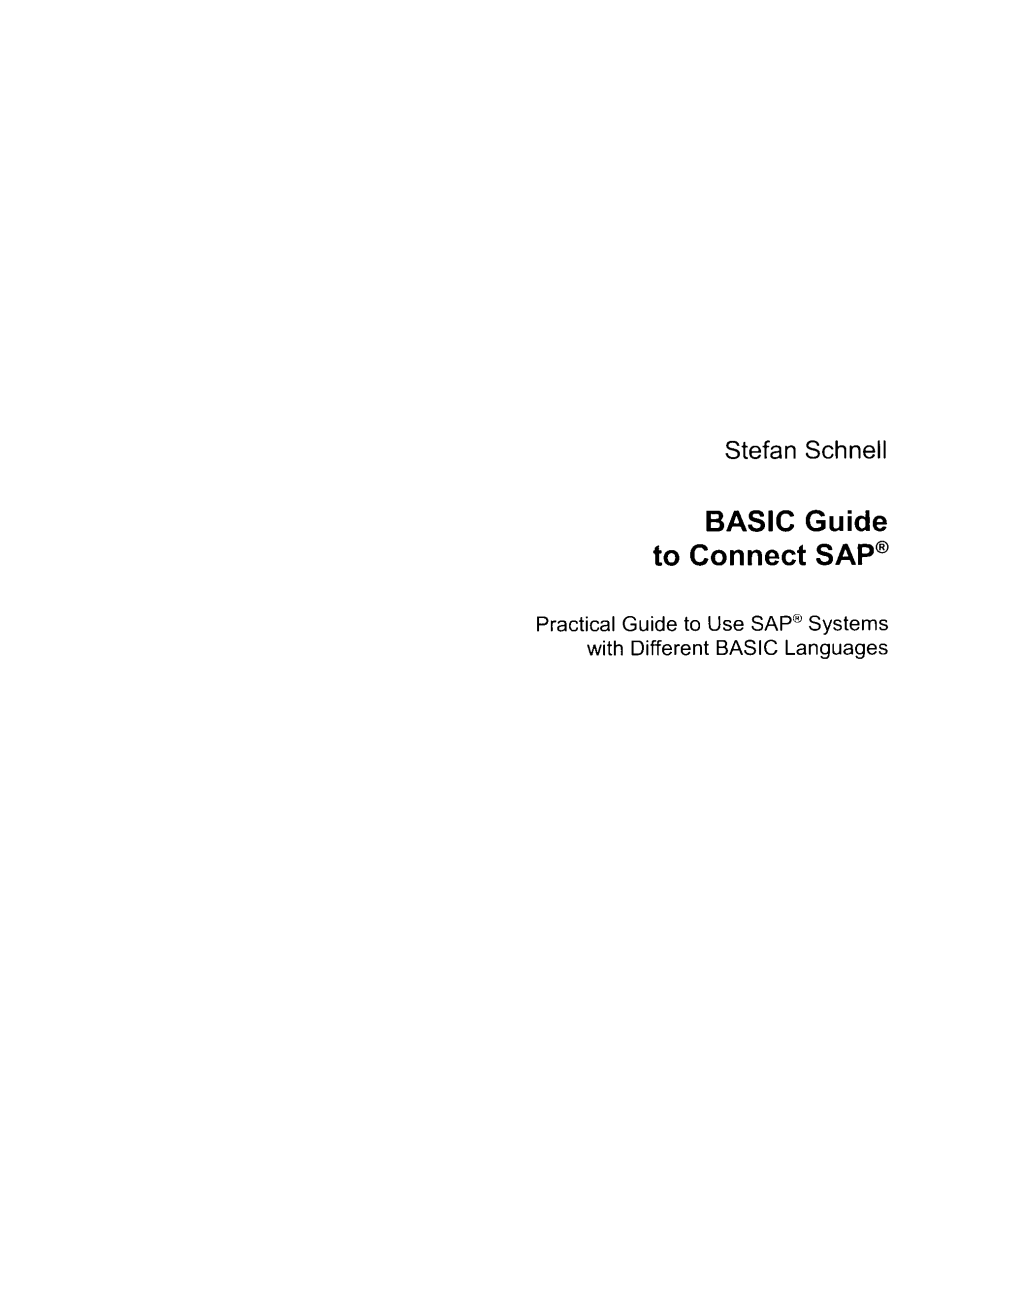 BASIC Guide to Connect SAP®